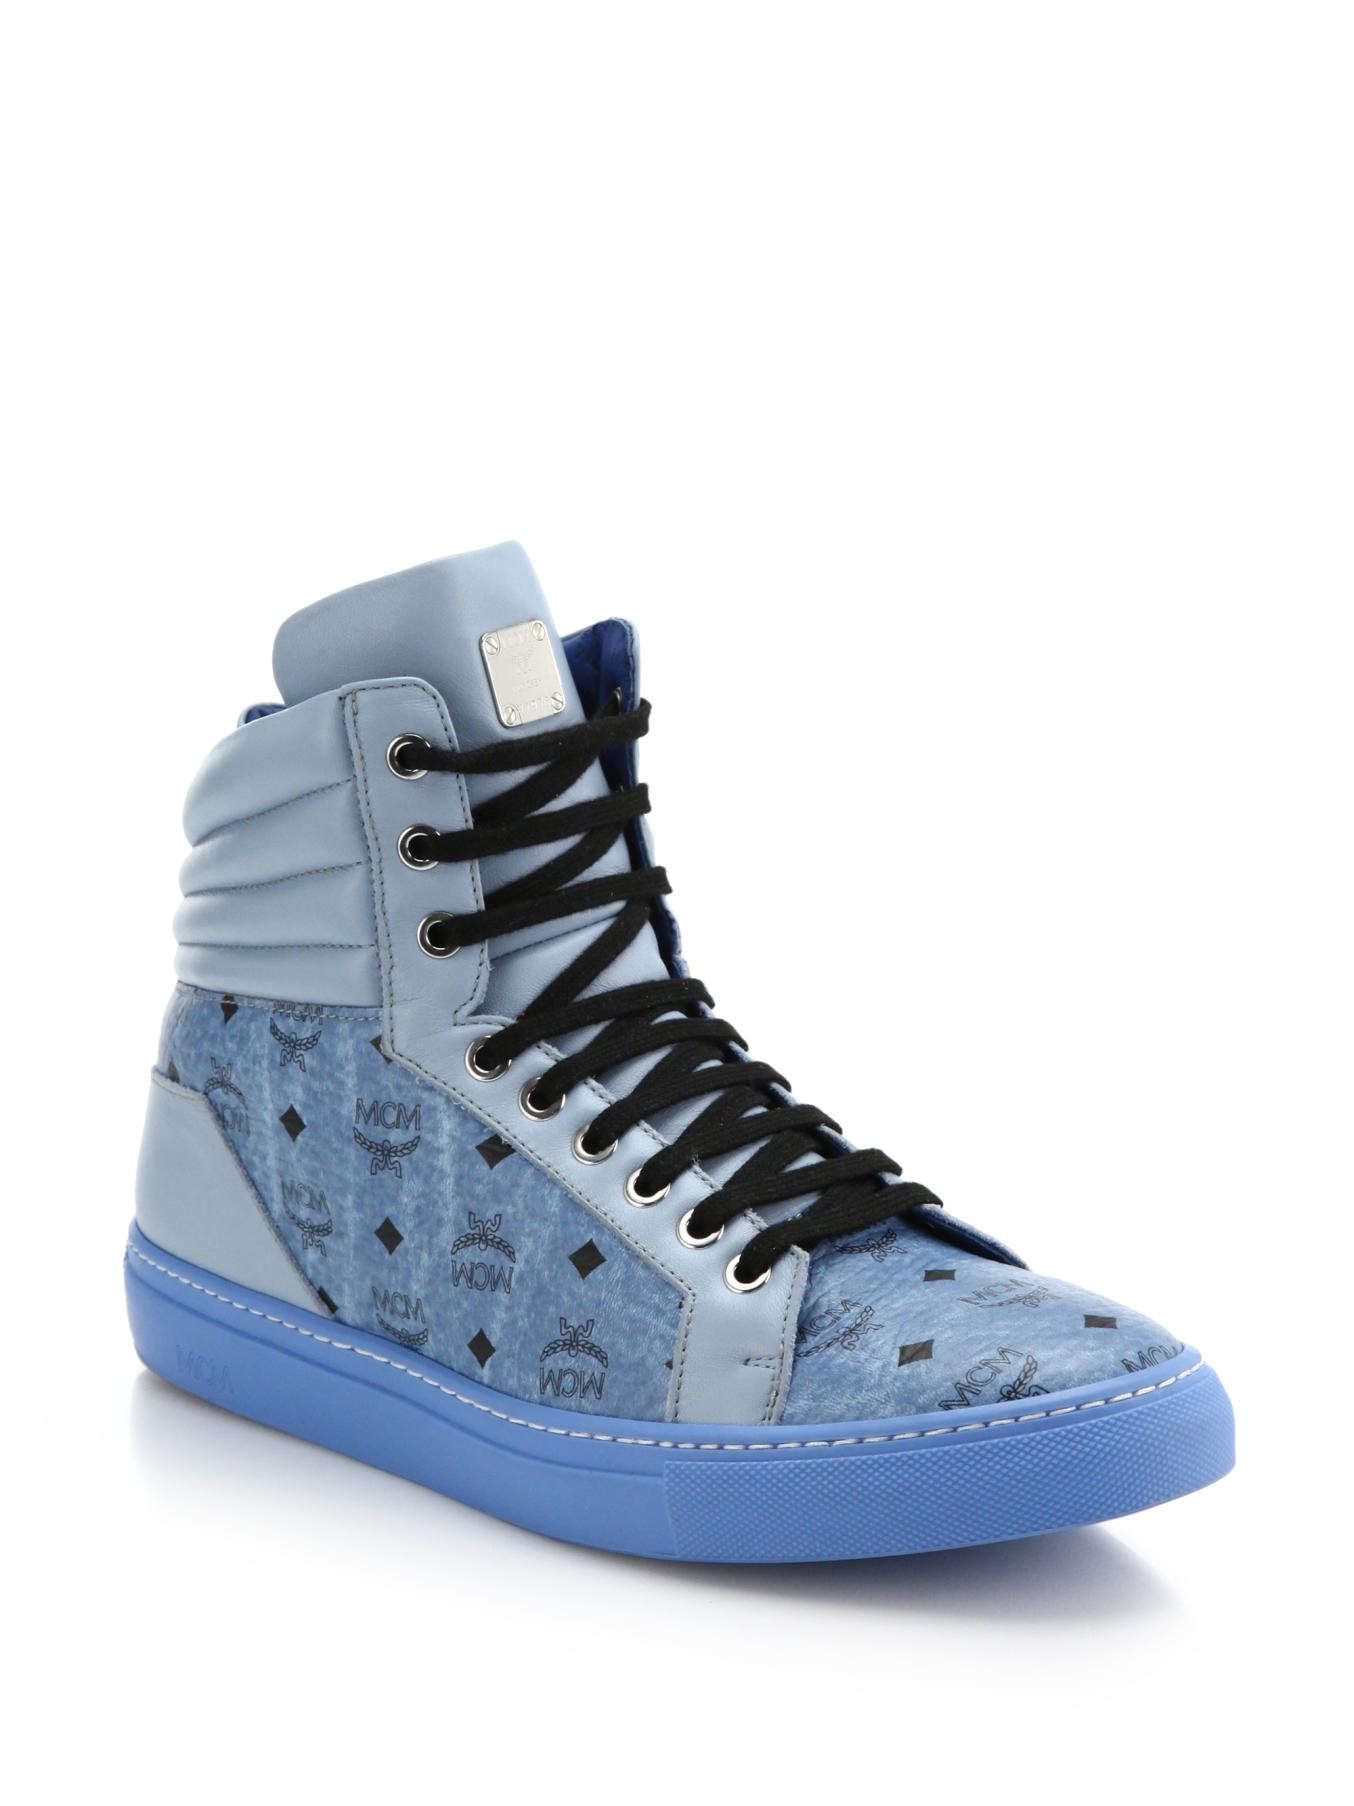 Lyst - MCM Logo-print Leather High-top Sneakers in Blue for Men